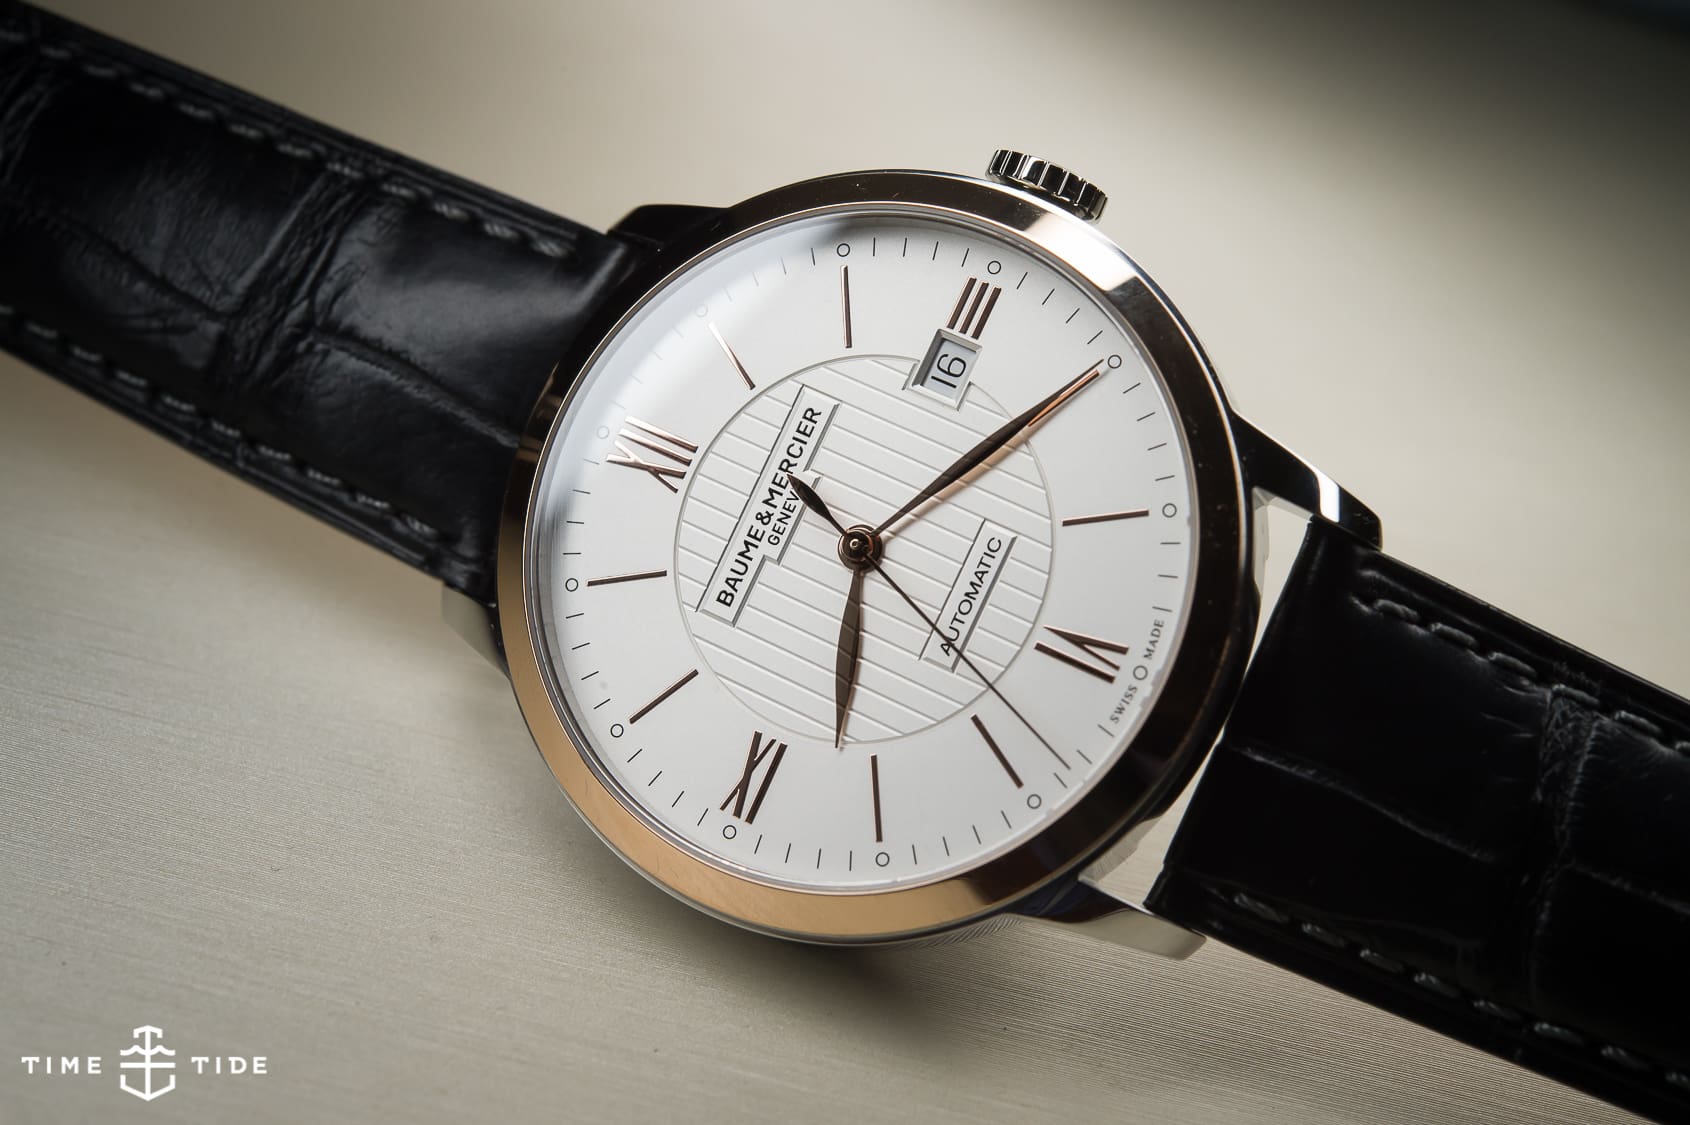 HANDS-ON: The Baume & Mercier Classima